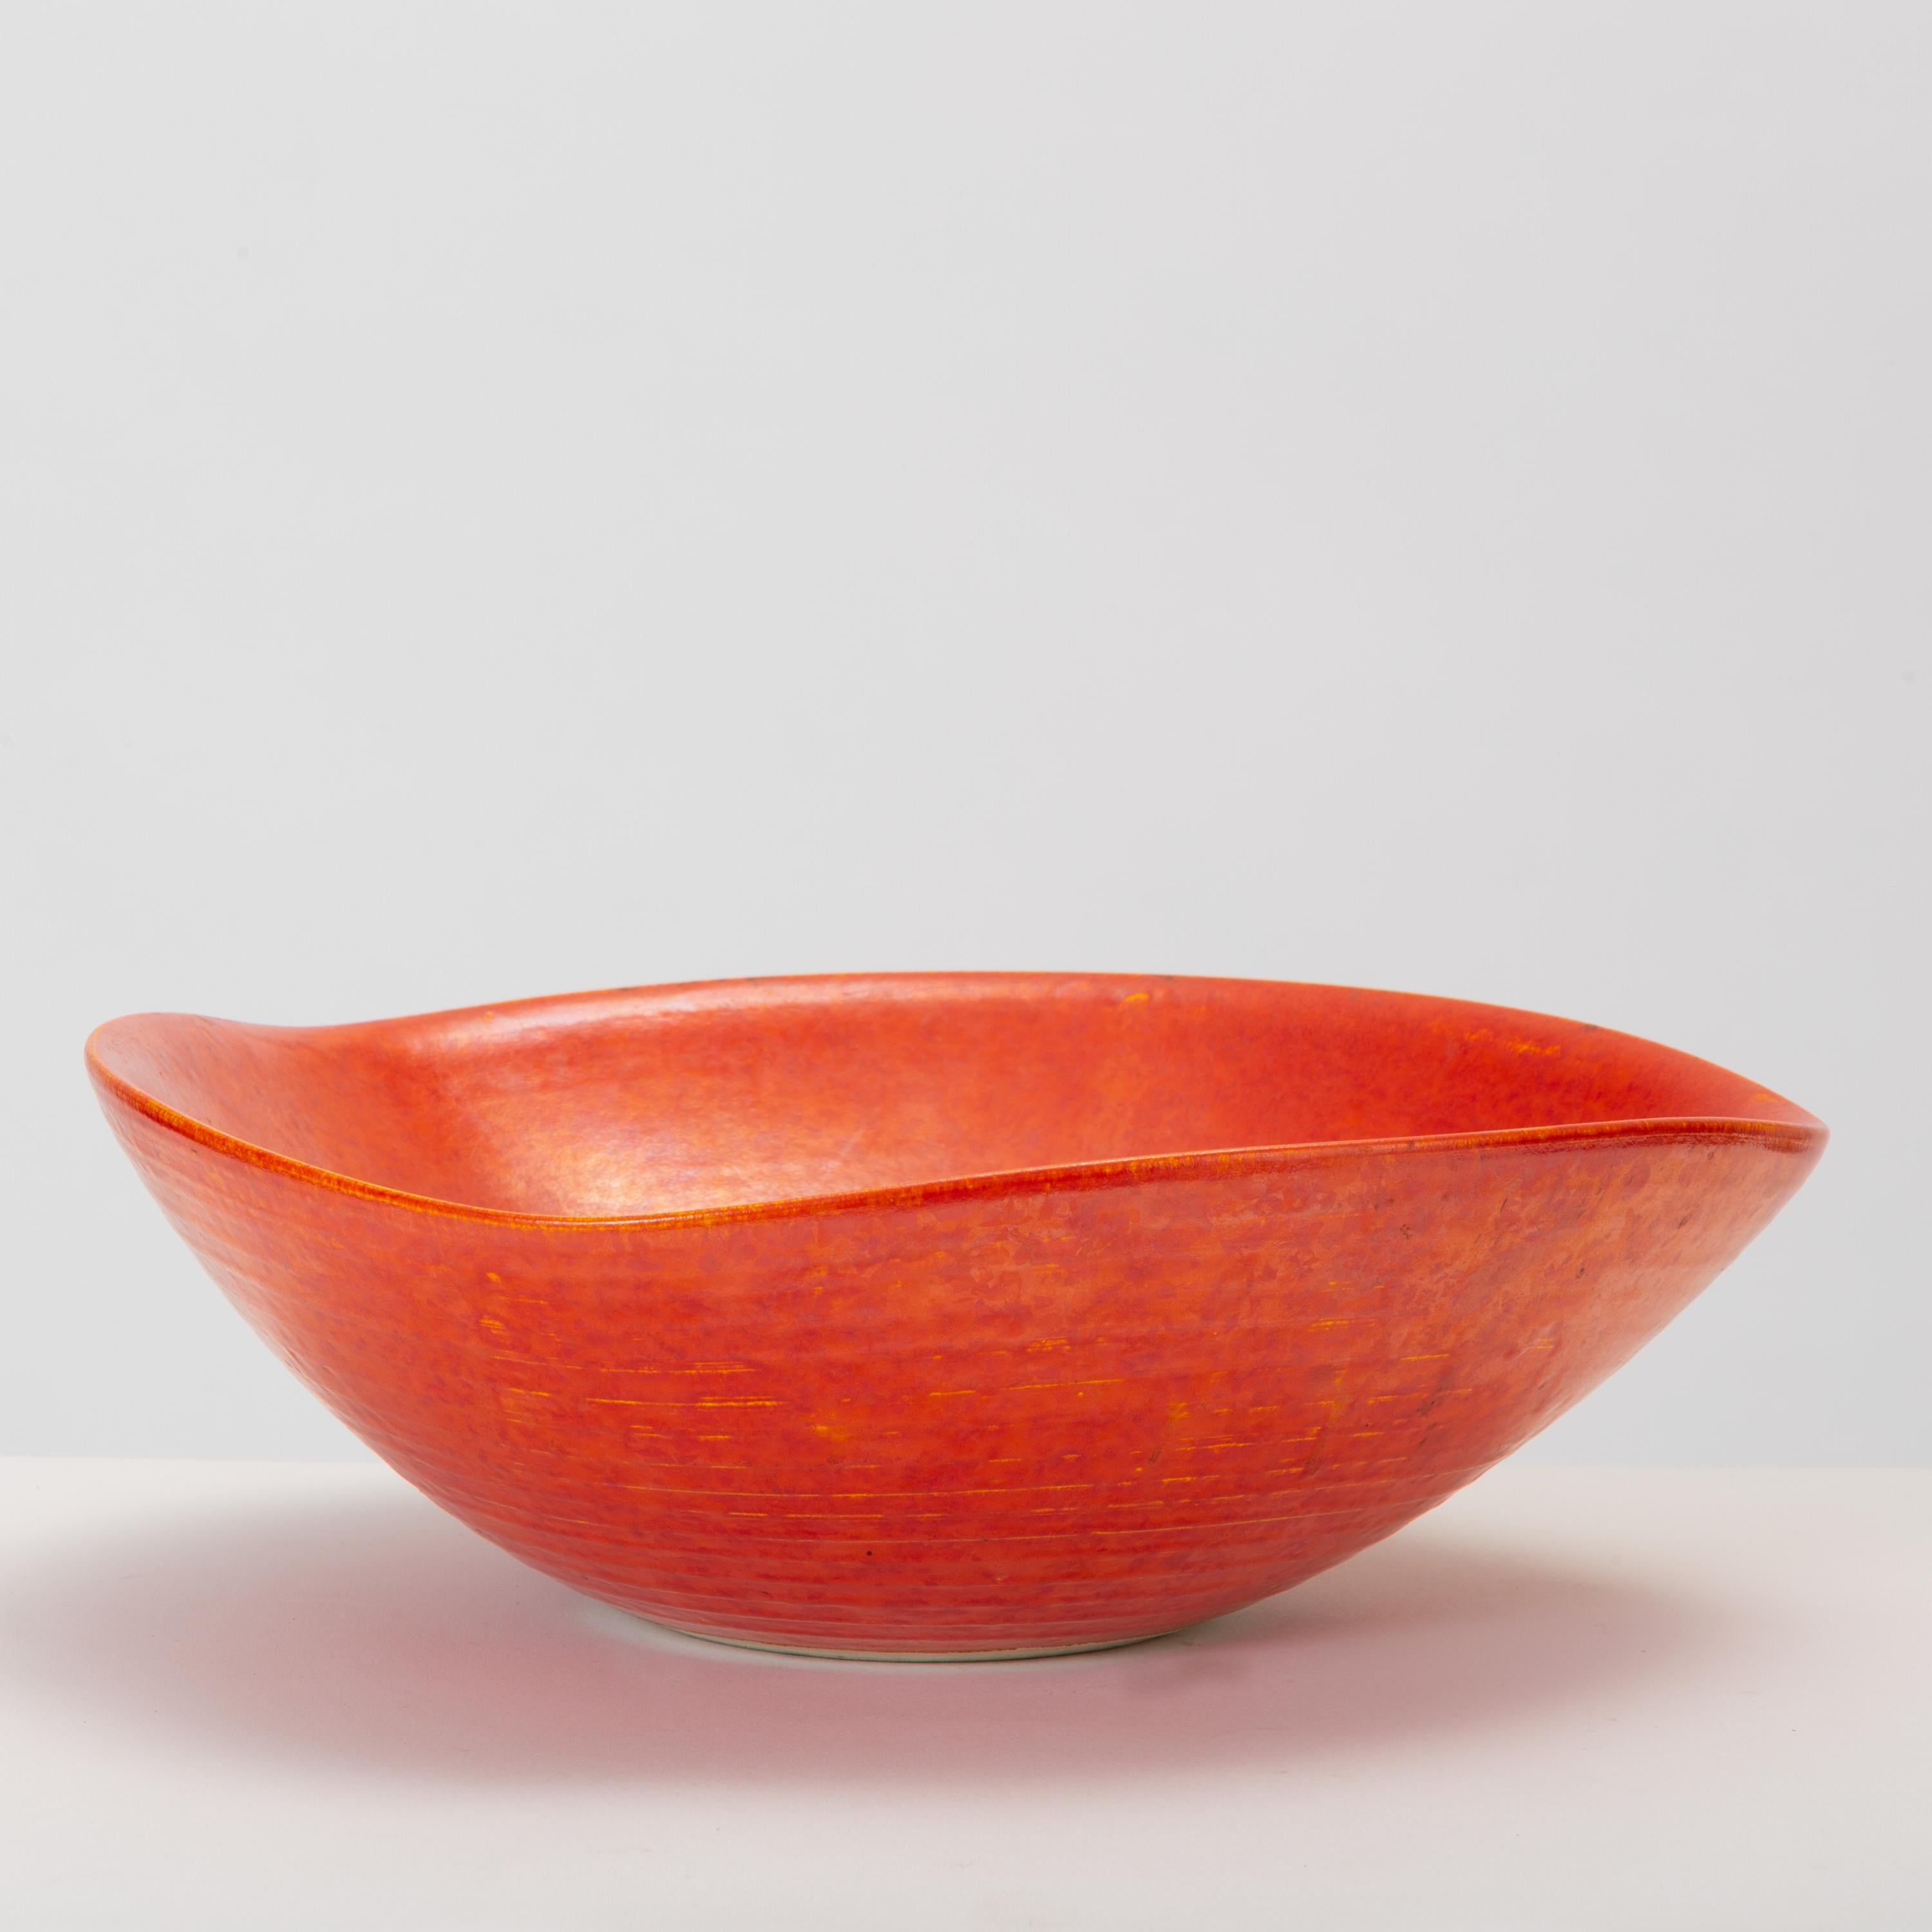 A tomato red studio pottery bowl from California with an irregular shape, ribbed texture, and a slightly iridescent glaze. Signed on bottom of bowl “1968 Oakland Rev. Y Tsugiyama.”

Condition: Excellent vintage condition with no chips or